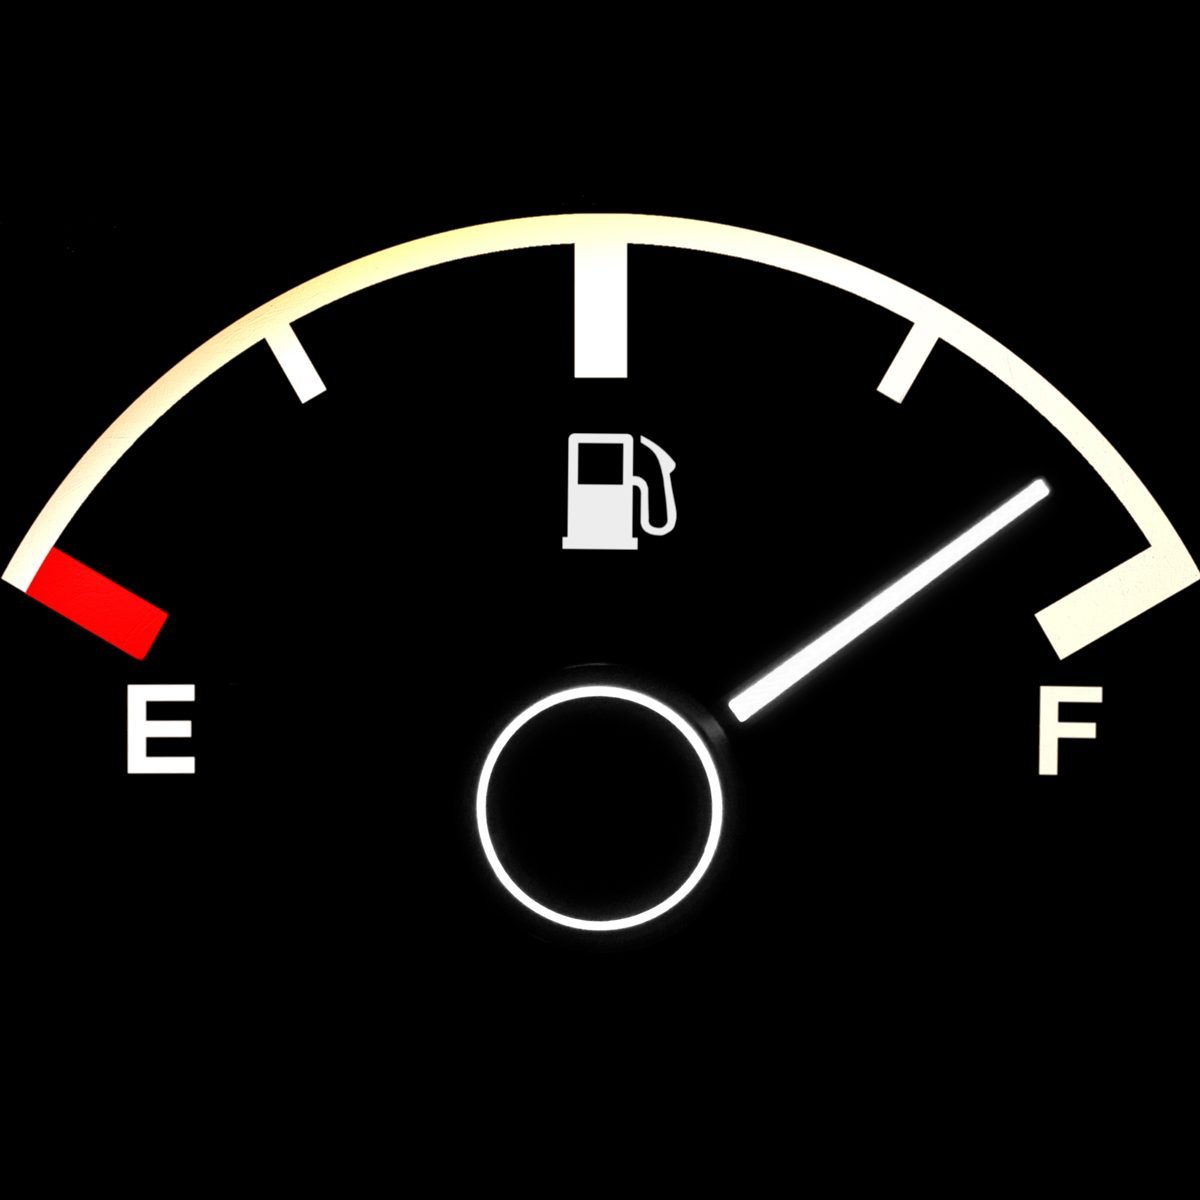 gasoline - Should I really keep my gas tank at least half full